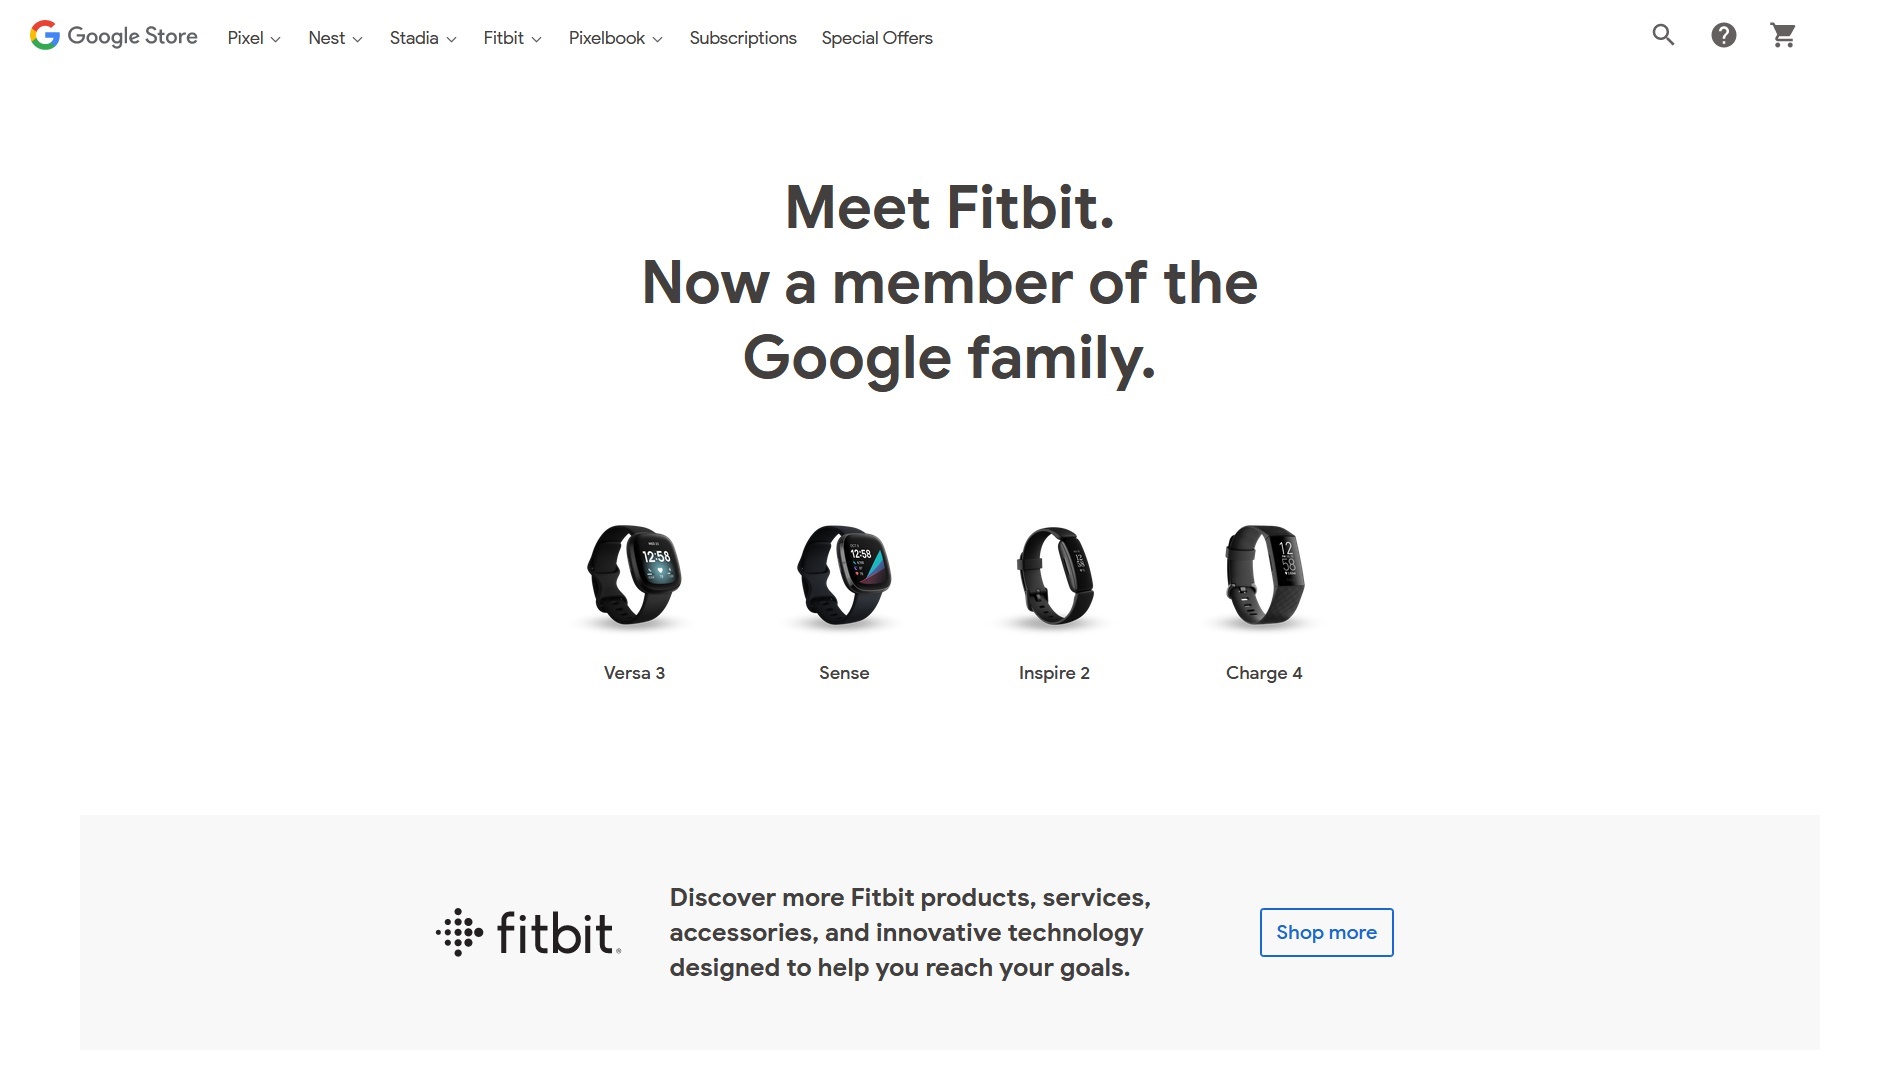 Fitbit devices appear on the Google Store for the first time